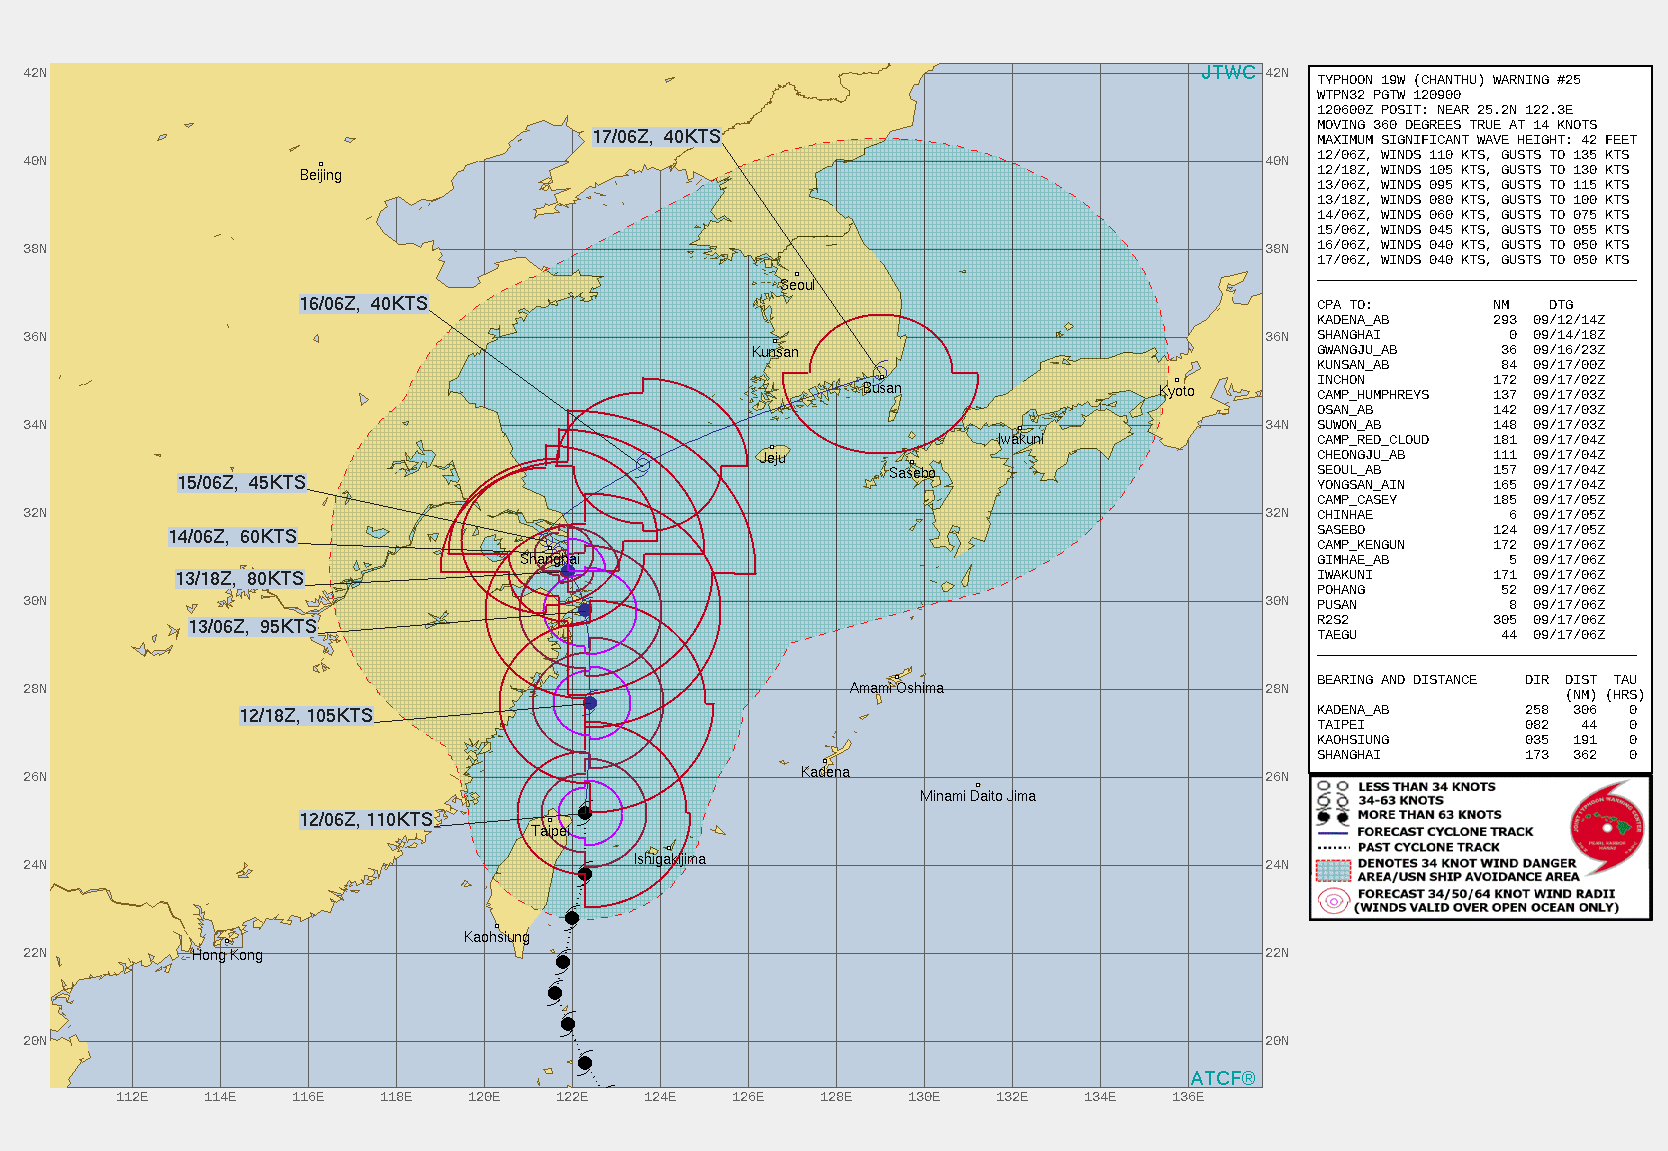 TY 19W(CHANTHU). WARNING 25 ISSUED AT 12/09UTC.SIGNIFICANT FORECAST CHANGES: THERE ARE NO SIGNIFICANT CHANGES TO THE FORECAST FROM THE PREVIOUS WARNING.  FORECAST DISCUSSION: TY 19W IS FORECAST TO CONTINUE TRACKING NORTHWARD ALONG THE WESTERN PERIPHERY OF THE DEEP-LAYER SUBTROPICAL RIDGE(STR) TO THE EAST THROUGH 24H, BEFORE ENTERING A WEAK STEERING ENVIRONMENT BETWEEN A TRIO OF RIDGES TO THE NORTHWEST, EAST AND SOUTHWEST. ONCE THE SYSTEM ENTERS THE WEAK STEERING PATTERN, IT WILL SLOW SIGNIFICANTLY AND STALL IN THE VICINITY OF SHAHGHAI, REMAINING QUASI-STATIONARY OR DRIFTING SLIGHTLY POLEWARD BETWEEN 36H AND 72H. AN APPROACHING DEEP MID-LATITUDE TROUGH WILL BEGIN TO ERODE THE RIDGE TO THE WEST BY 72H AND BY 96H, TY 19W WILL BEGIN TO ACCELERATE TO THE EAST ALONG THE NORTHWEST BOUNDARY OF THE DEEP STR TO THE SOUTHEAST AND AHEAD OF THE TROUGH. AS THE SYSTEM MOVES OVER THE SOUTHERN COAST OF KOREA BY 120H IT IS EXPECTED TO BEGIN EXTRATROPICAL TRANSITION (ETT) AS IT INTERACTS WITH THE BAROCLINIC ZONE, EMBEDS WITHIN THE UPPER-LEVEL WESTERLIES AND DEVELOPS MODERATE THERMAL ADVECTION. TY 19W IS EXPECTED TO STEADILY WEAKEN OVER THE NEXT 72 HOURS AS IT ENCOUNTERS MID-LEVEL NORTHWESTERLY SHEAR, DECREASING OUTFLOW AND DECREASING MID-LEVEL RELATIVE HUMIDITY. ONCE IT BECOMES QUASI-STATIONARY NEAR SHANGHAI. ONCE IT BEGINS MOVING NORTHEAST, SYSTEM WILL MAINTAIN MINIMAL TROPICAL STORM STRENGTH AS THE COMPETING EFFECTS OF STRONG POLEWARD OUTFLOW AND MODERATE TO STRONG VWS OFFSET ONE ANOTHER PRIOR TO ETT.